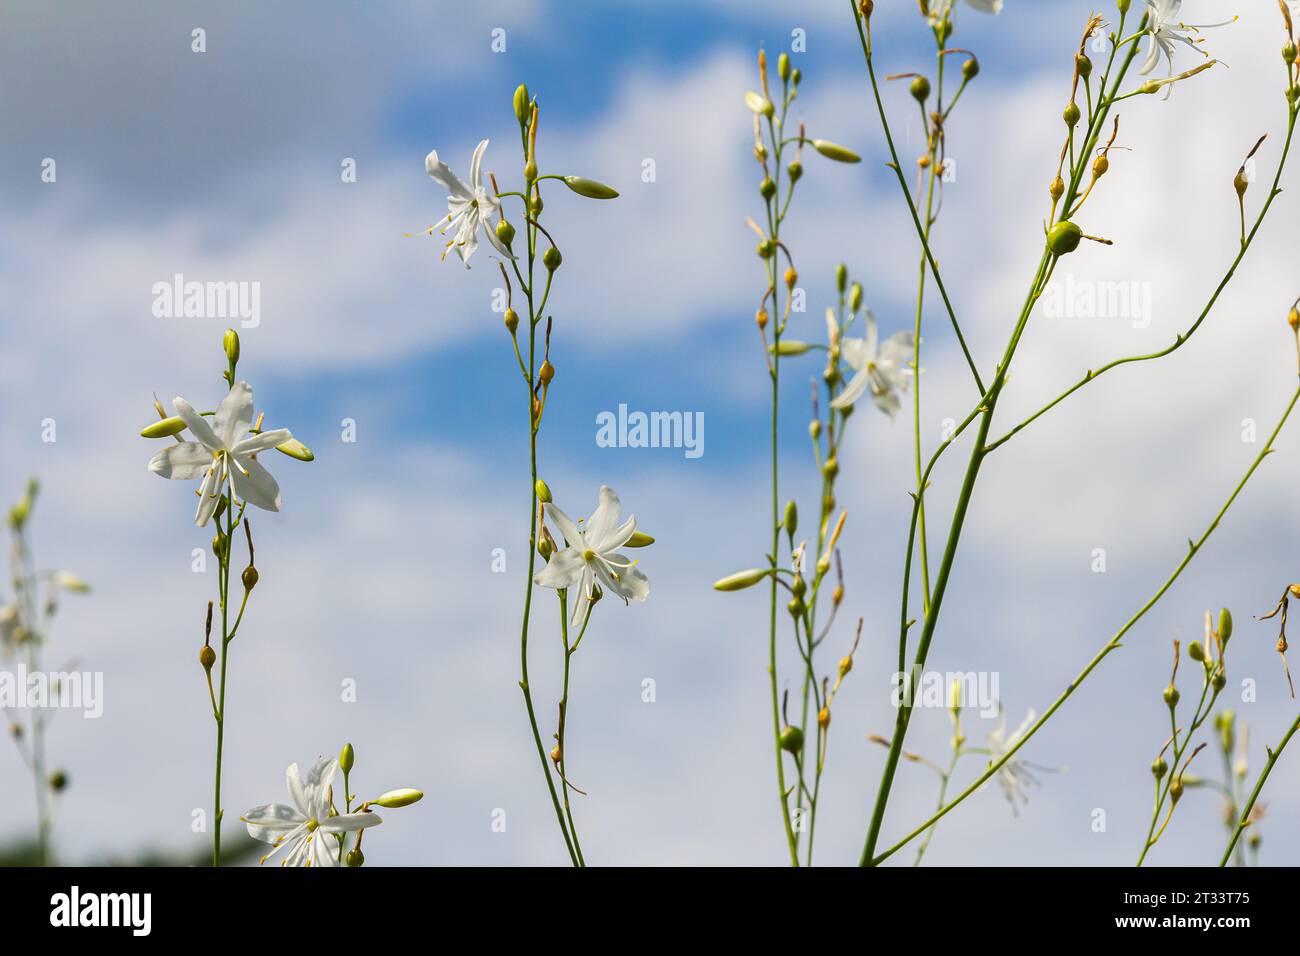 Fragile white and yellow flowers of Anthericum ramosum, star-shaped, growing in a meadow in the wild, blurred green background, warm colors, bright an Stock Photo